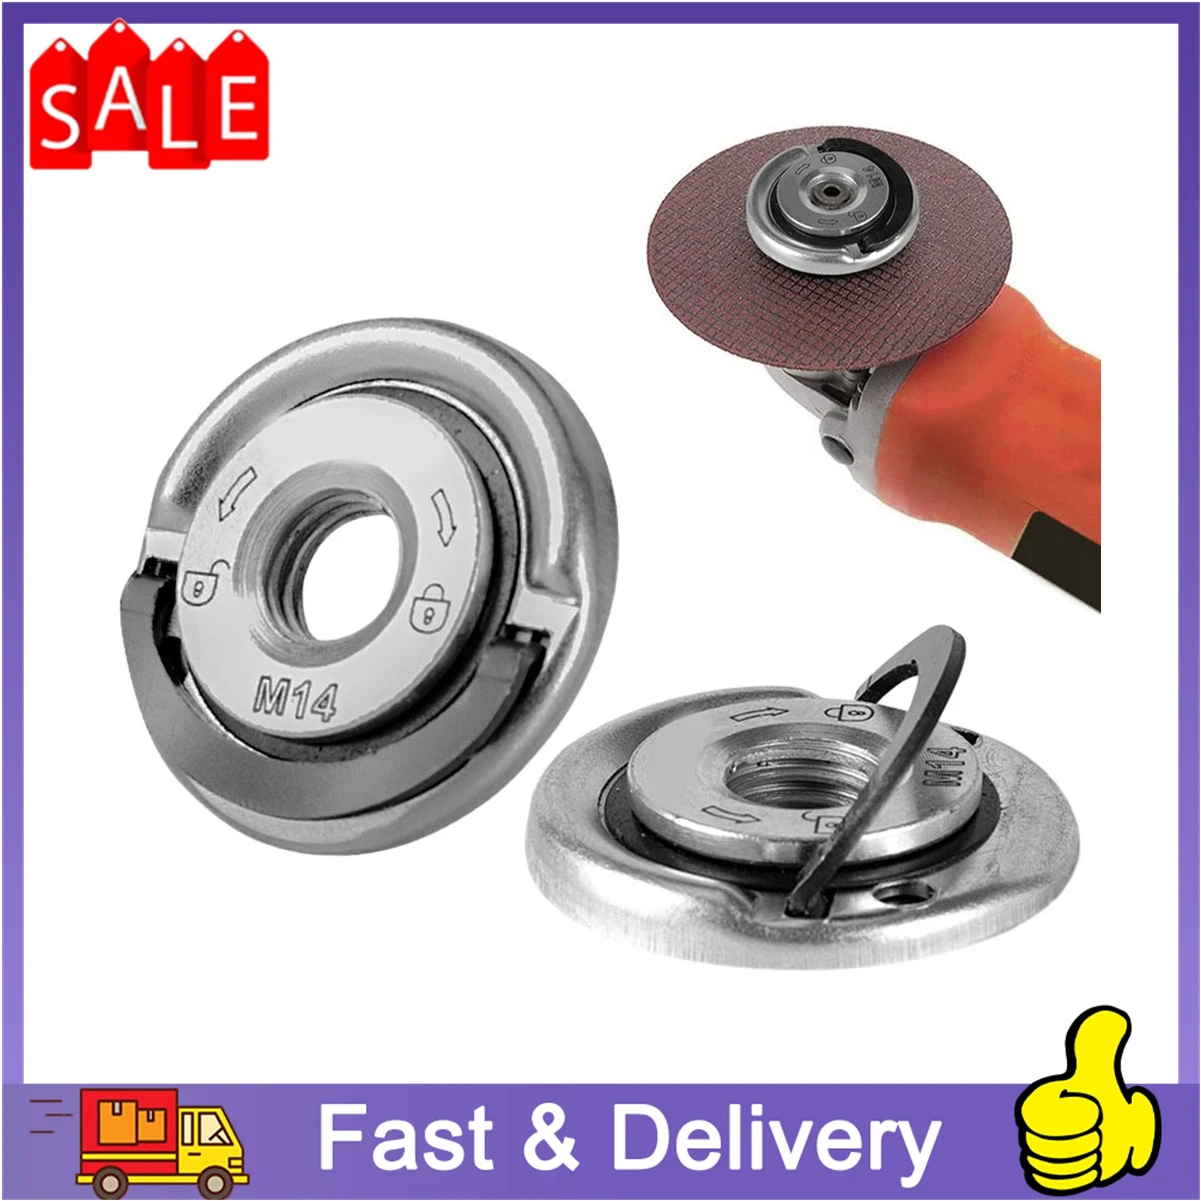 Quick Release Flange Nut M14 Thread Angle Grinder Release Locking Nut Pressing Plate For Angle Grinder Clamping Flange Accessory 6l bike quick release bike front fork bag waterproof cycling bag bicycle front bag bicycle storage bag cycling accessory